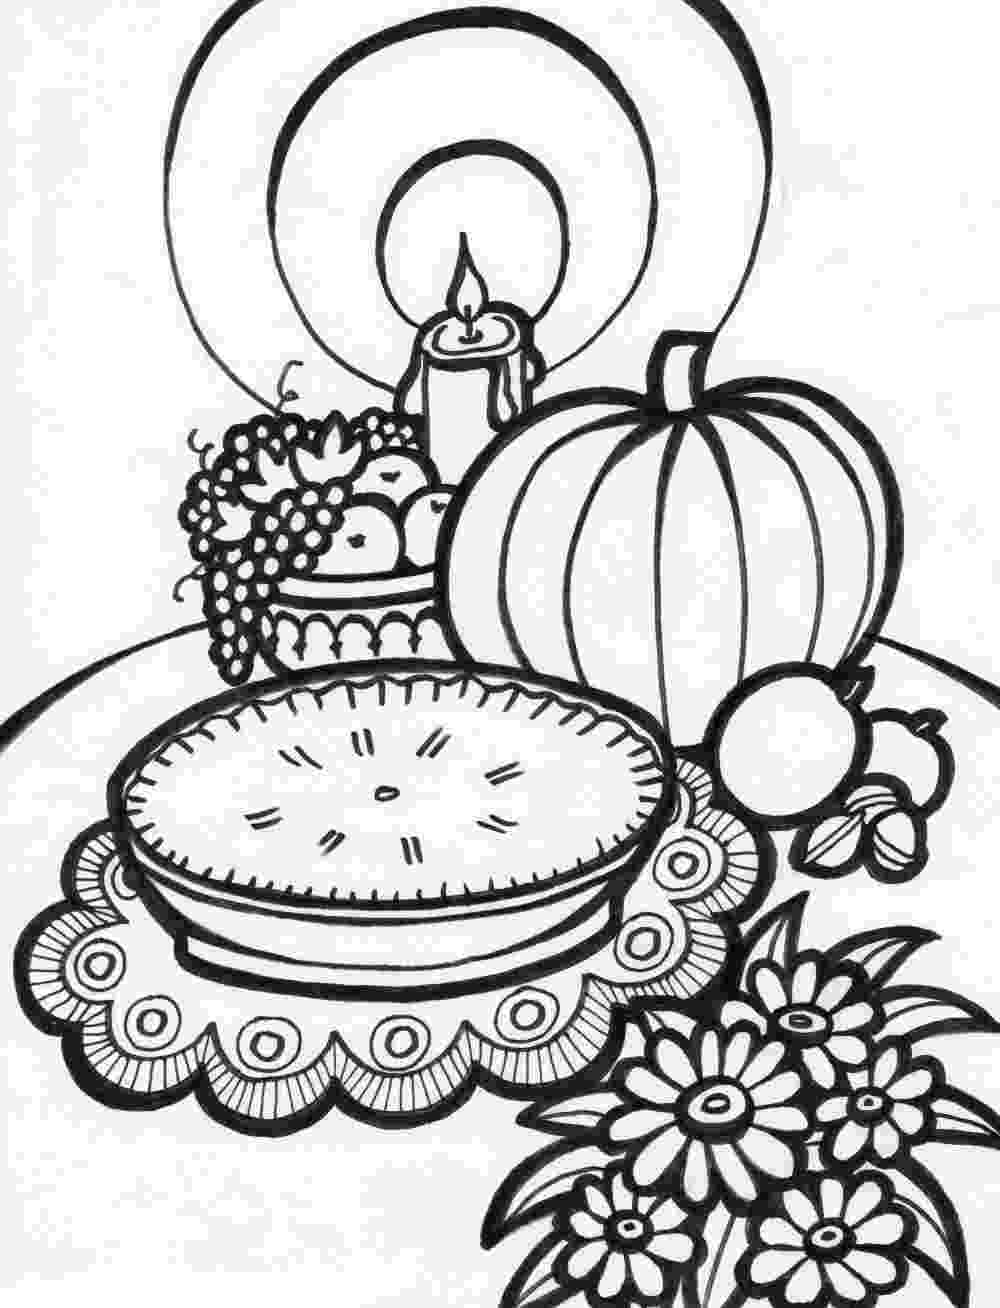 printable coloring pages thanksgiving free free thanksgiving coloring pages for adults kids pages coloring printable thanksgiving free 